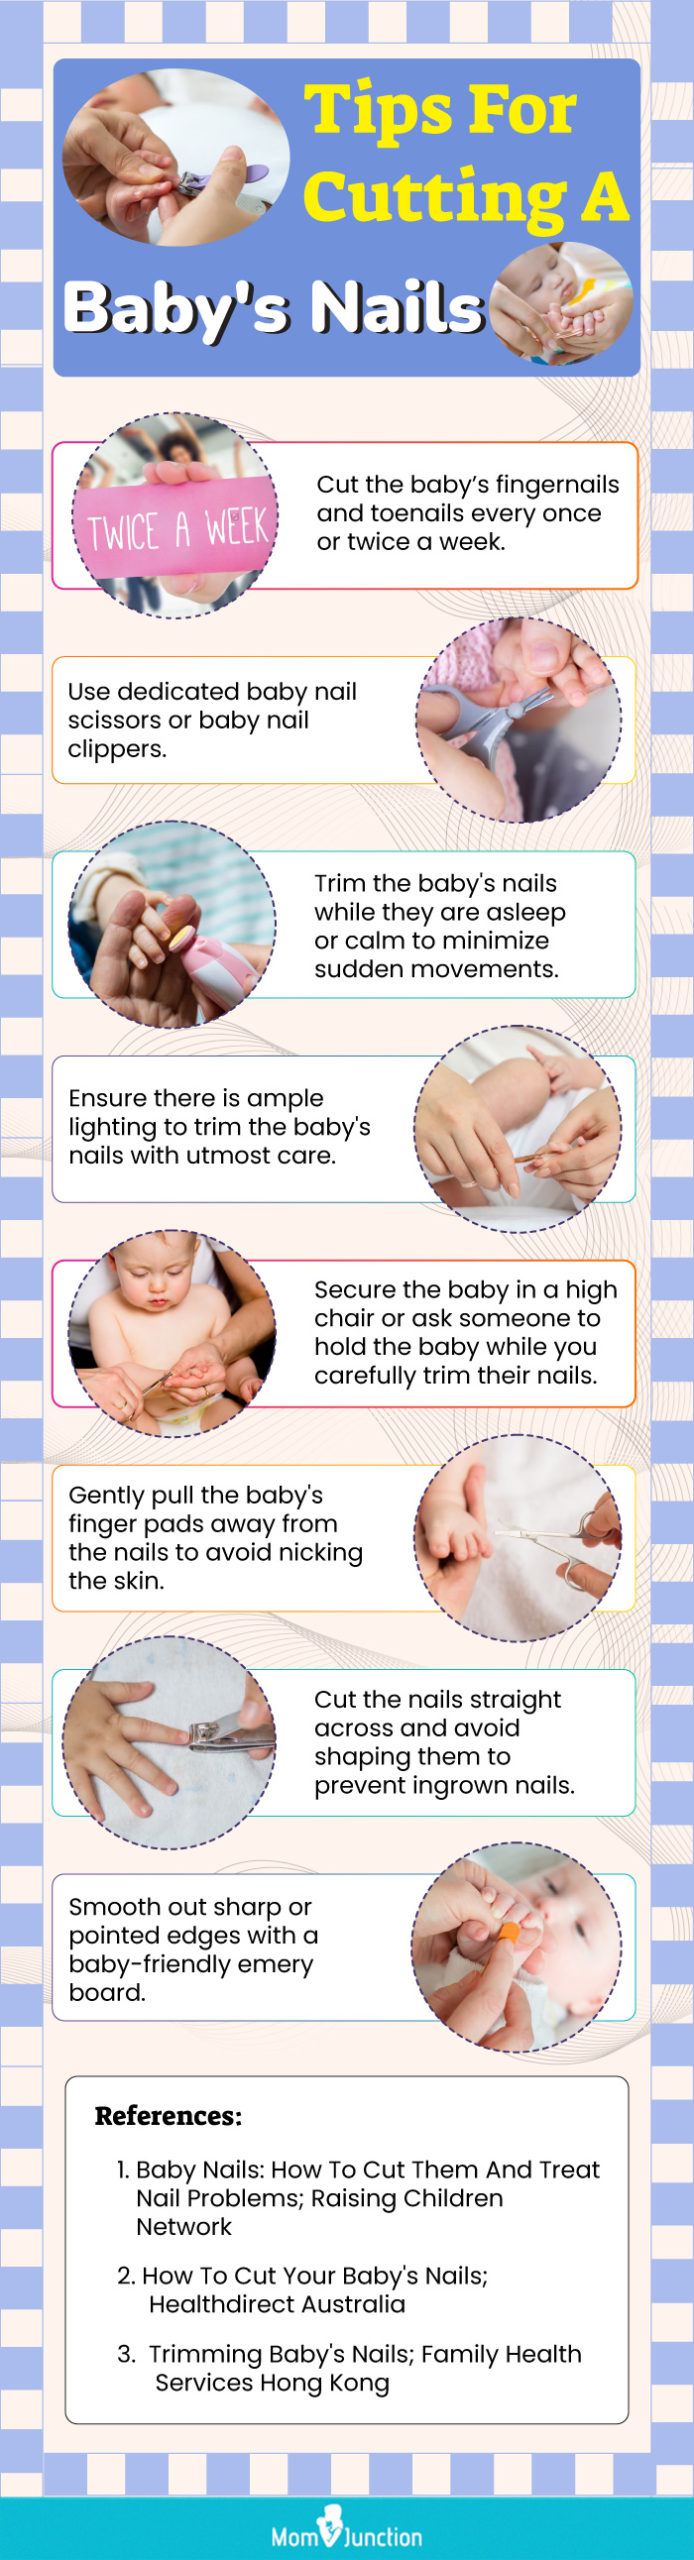 Top 7 Tips to Help Your Child Tolerate Nail Cutting